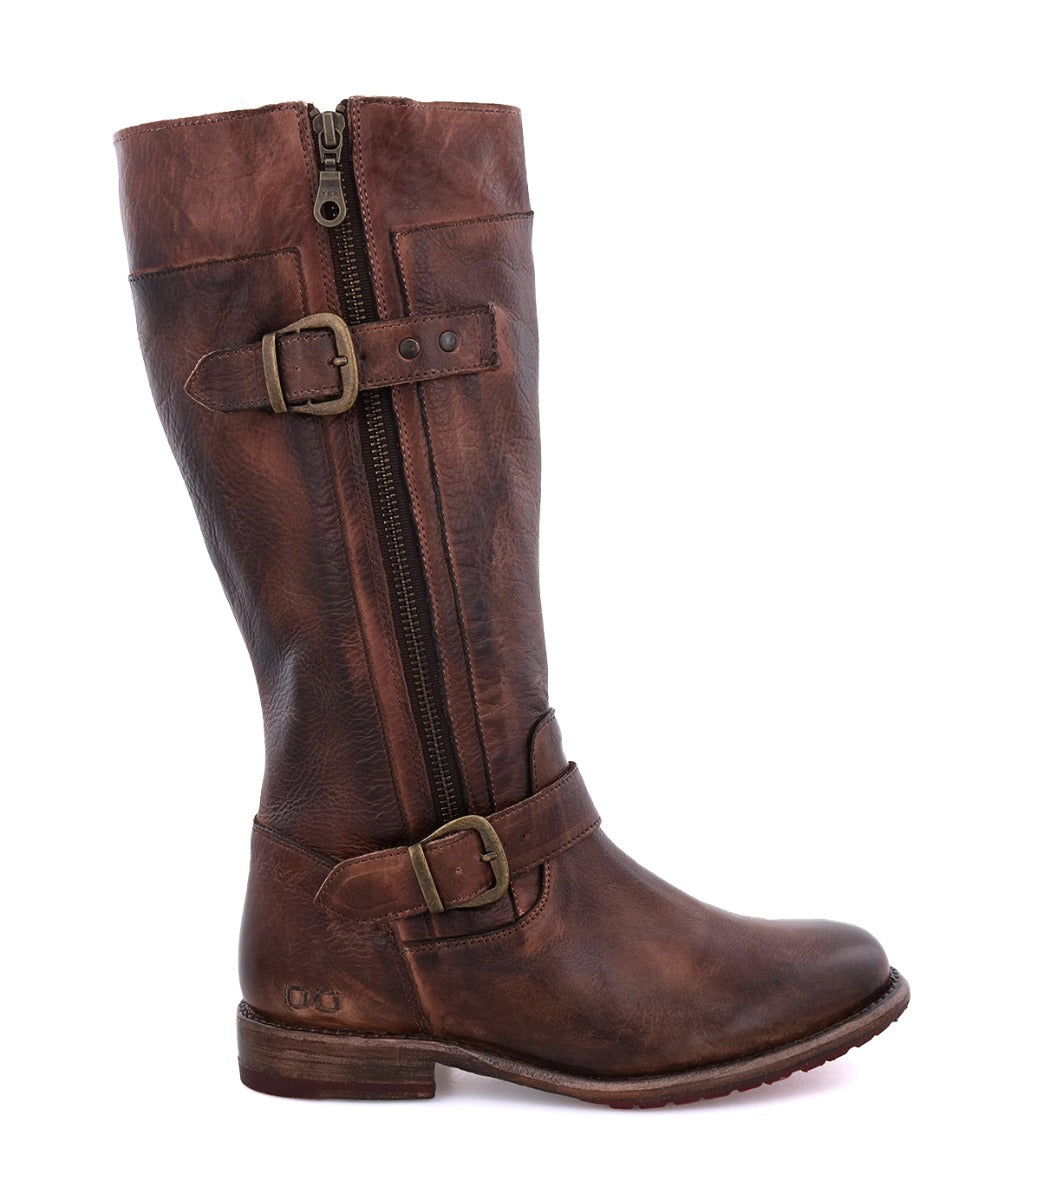 A women's Gogo Lug teak leather boot with buckles and buckles by Bed Stu.